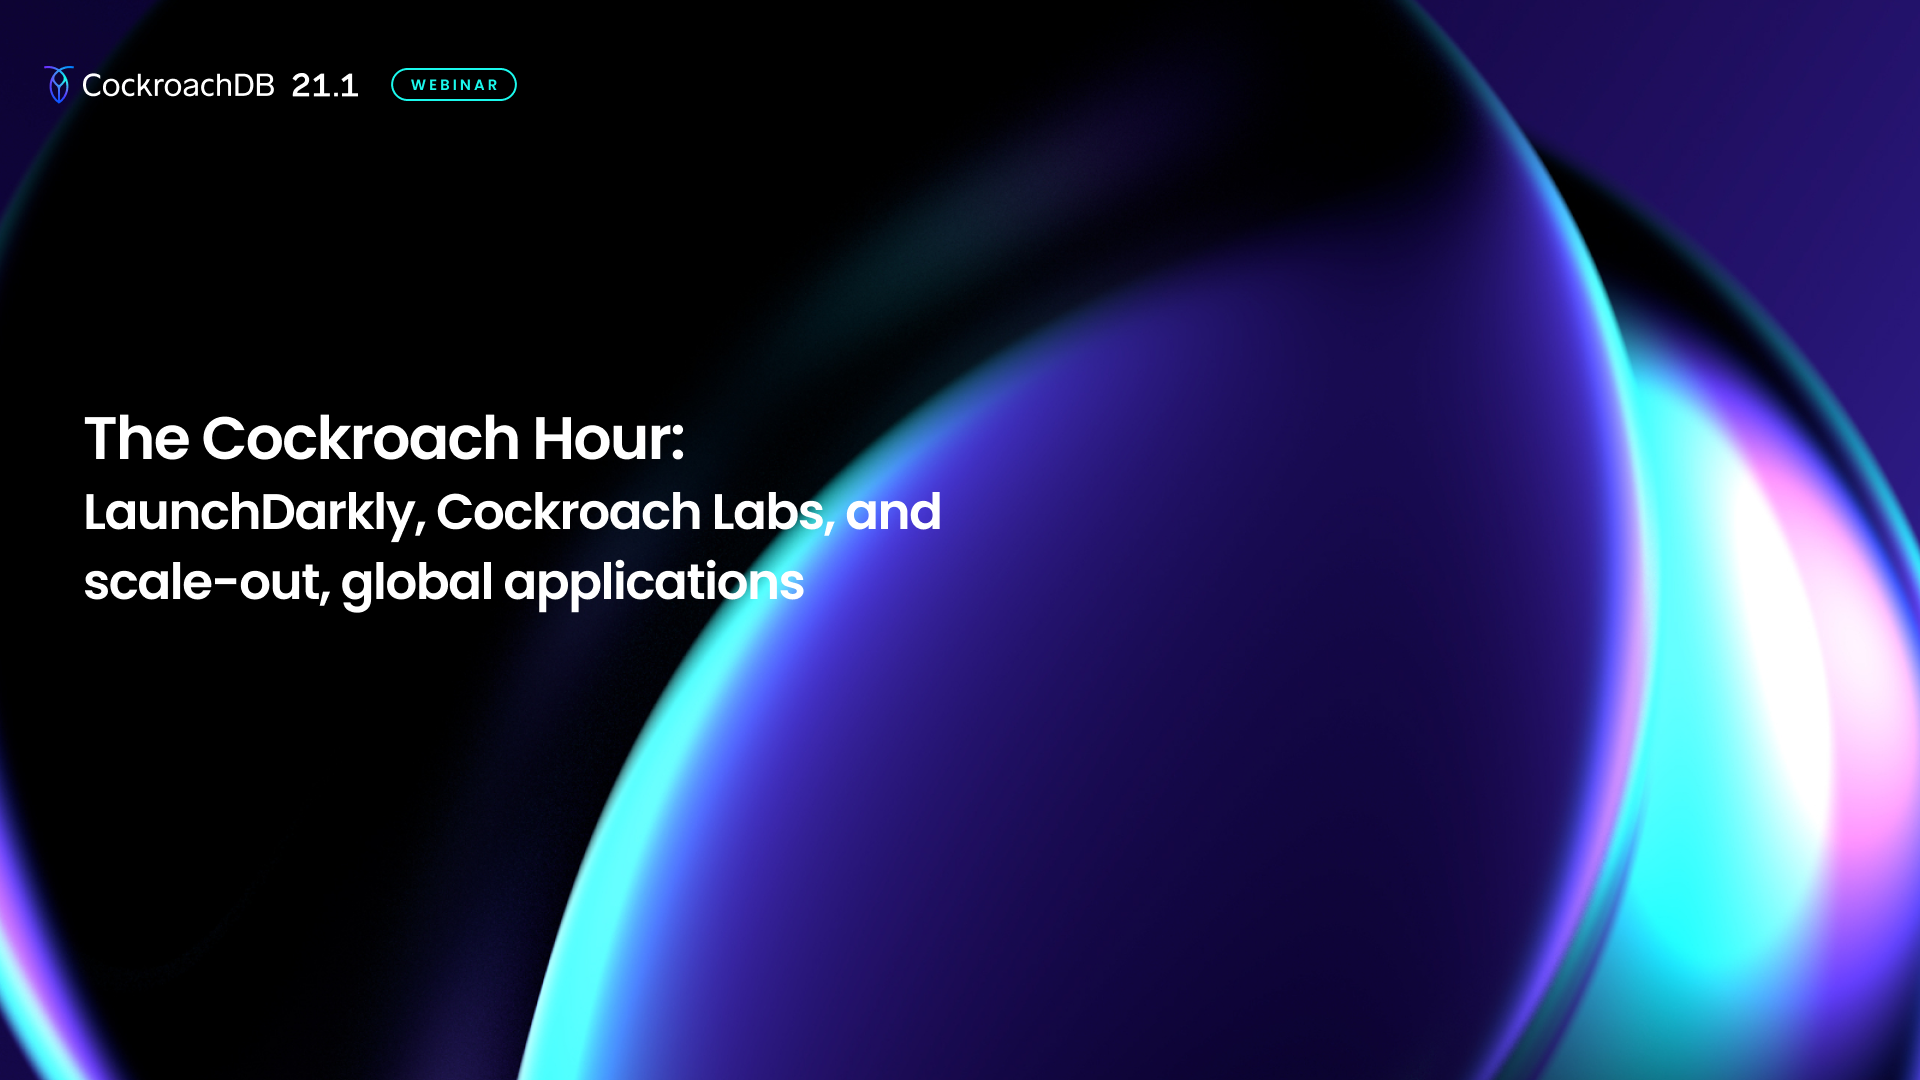 The Cockroach Hour: LaunchDarkly, Cockroach Labs, and scale-out, global applications 